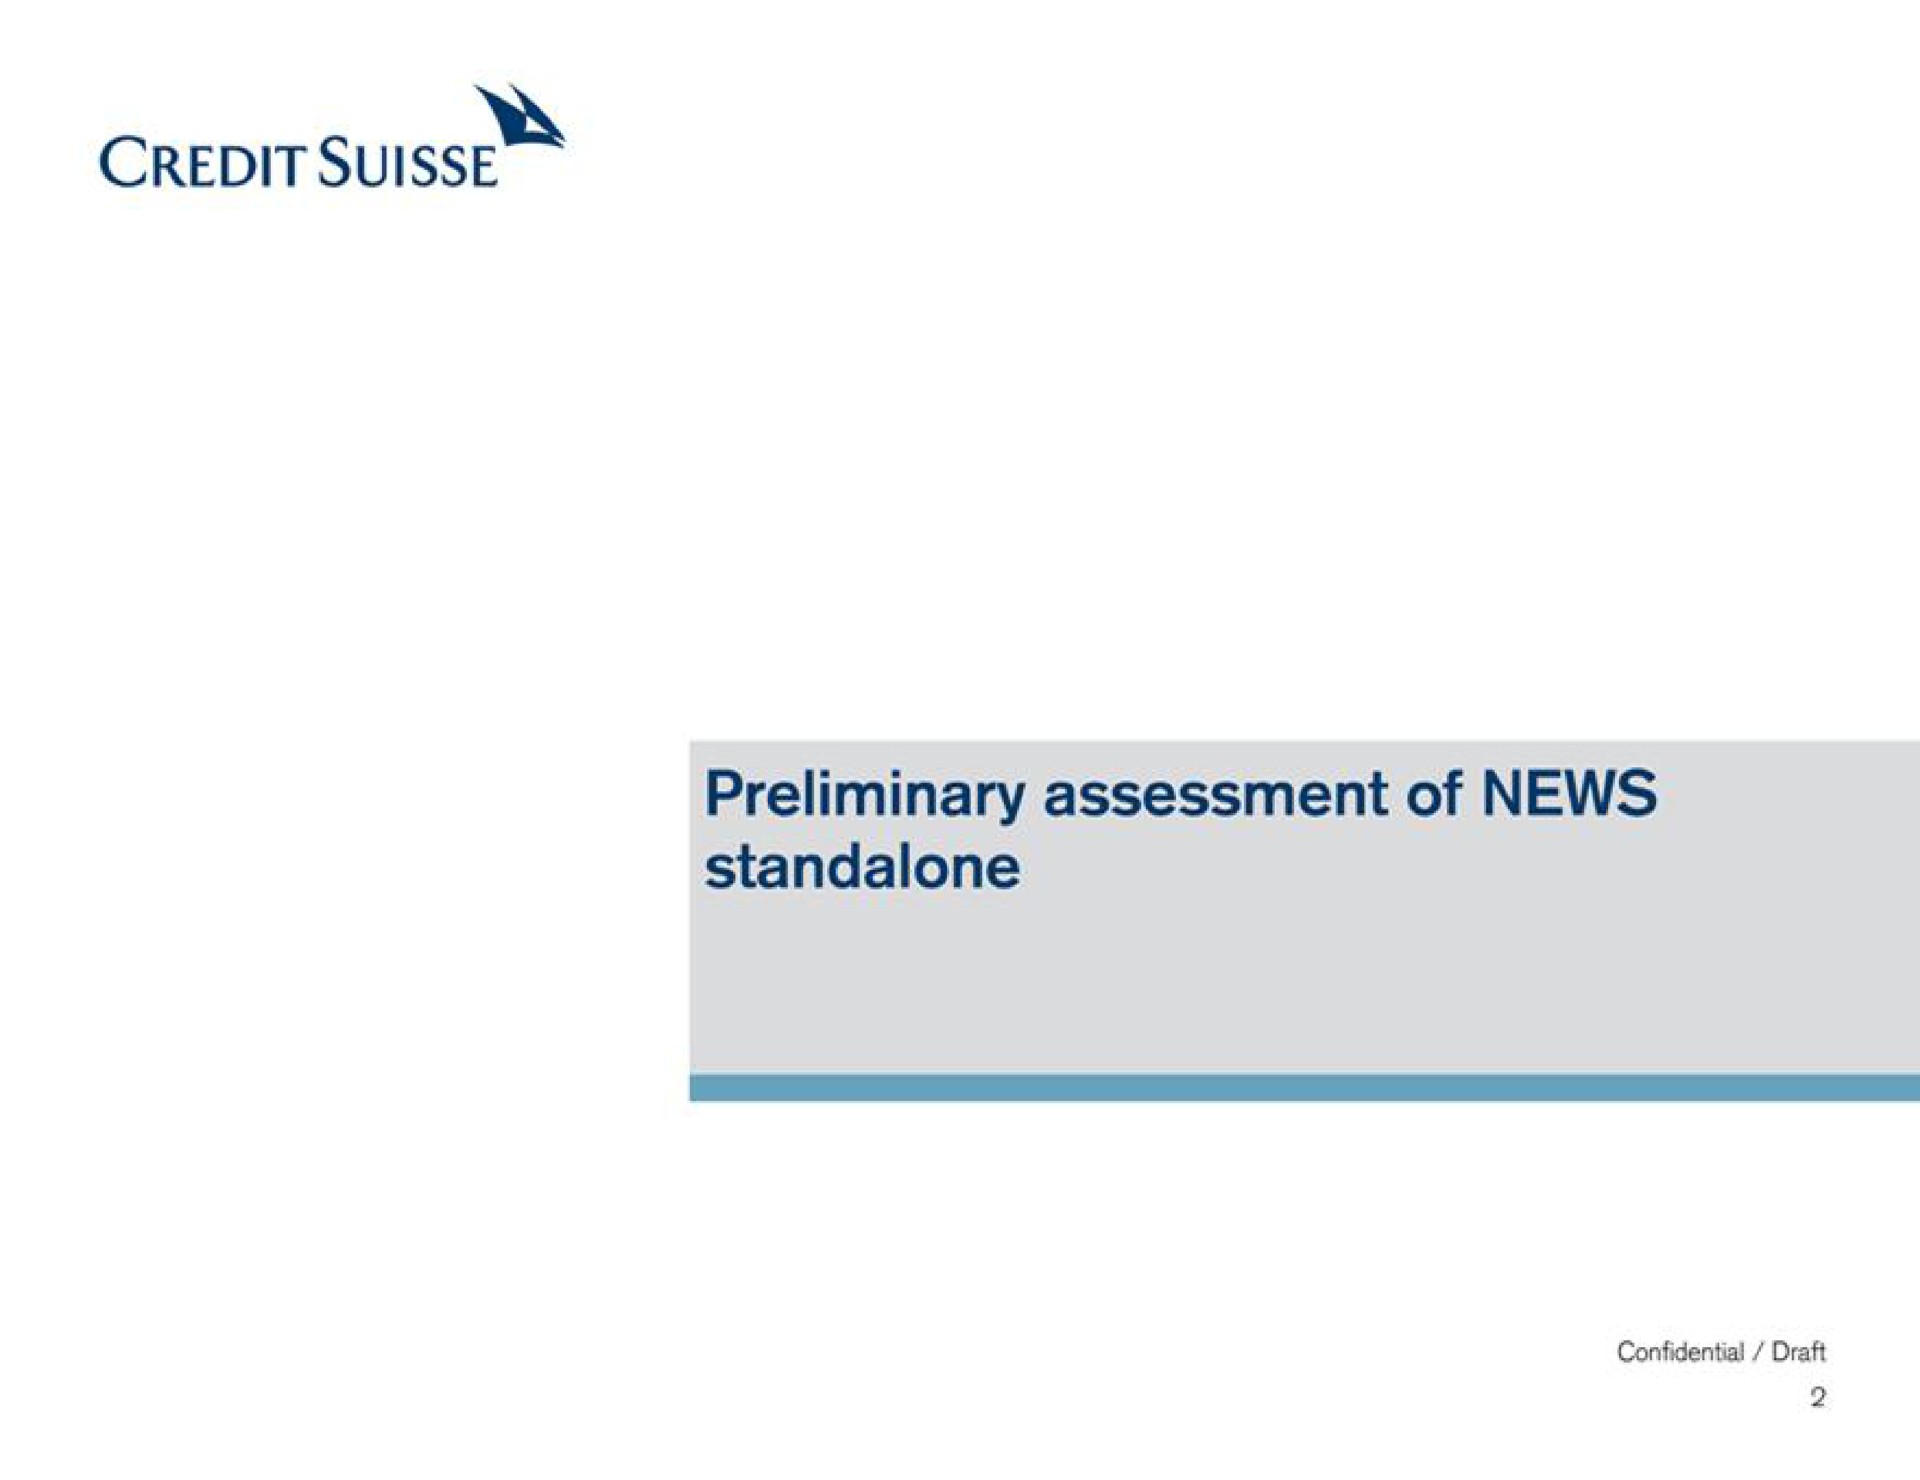 credit preliminary assessment of news | Credit Suisse